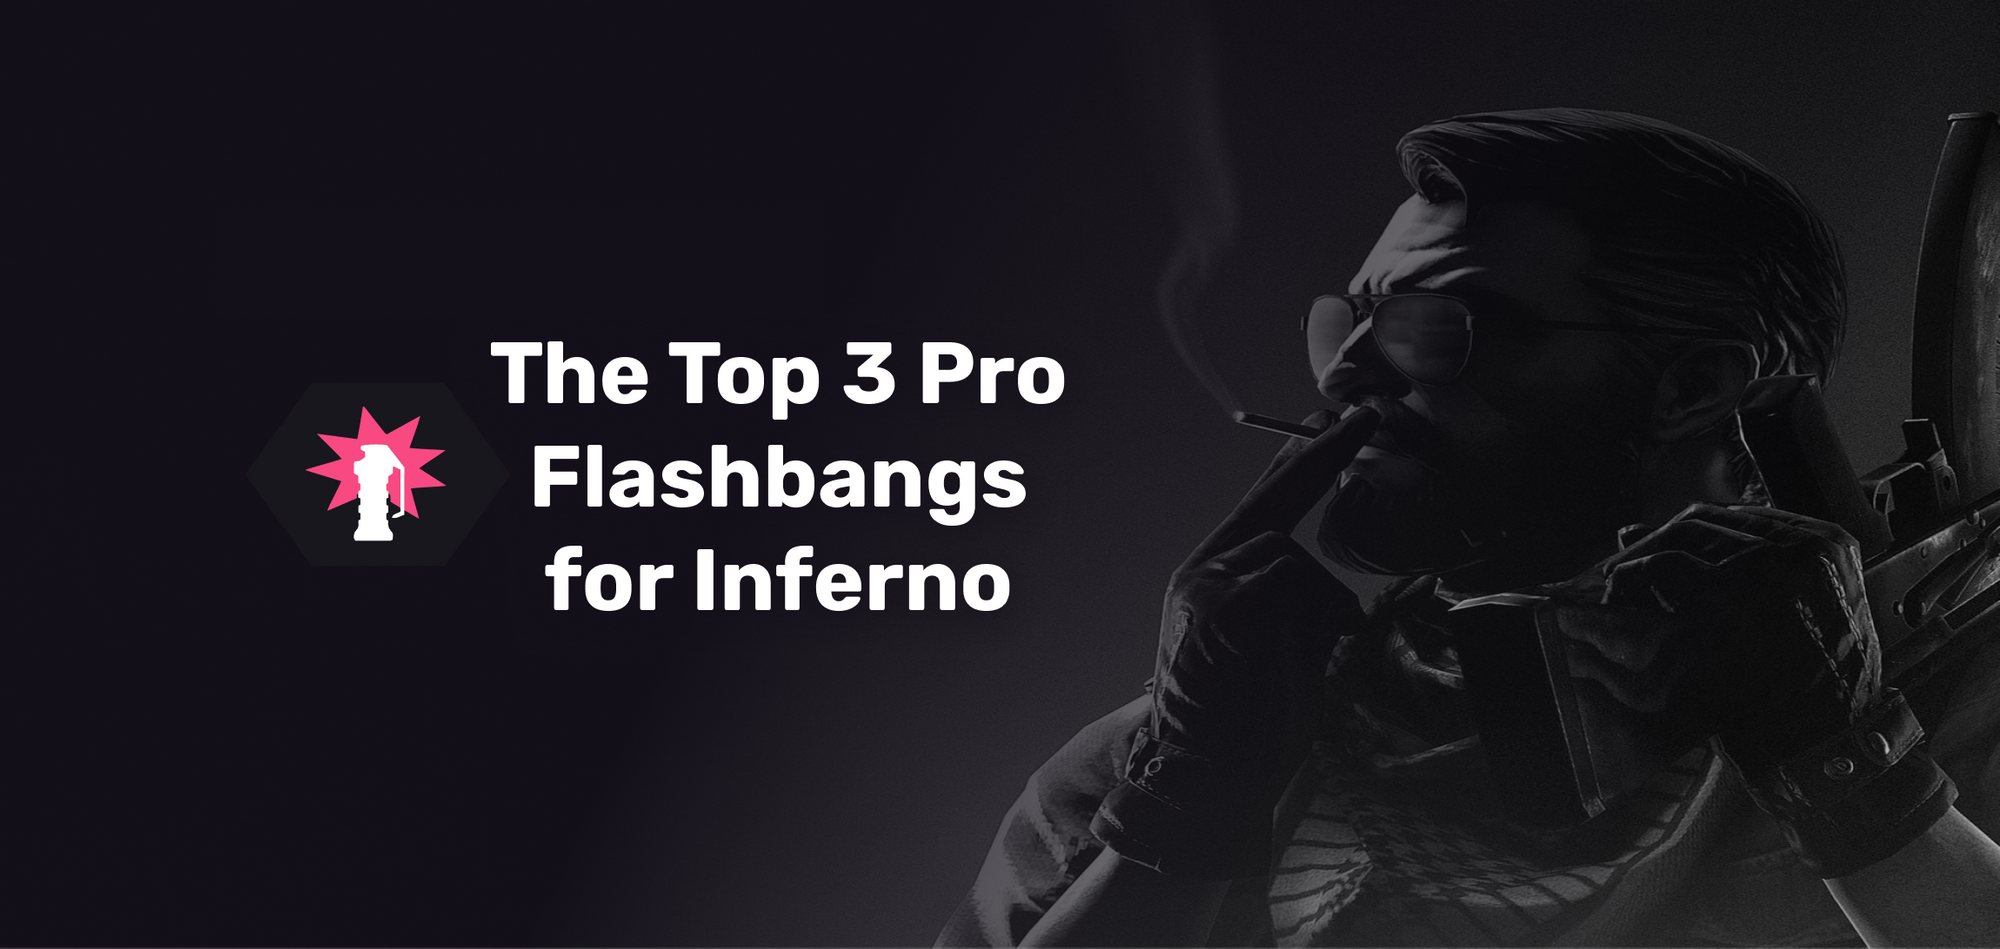 The Top 3 Pro Flashbangs for Inferno